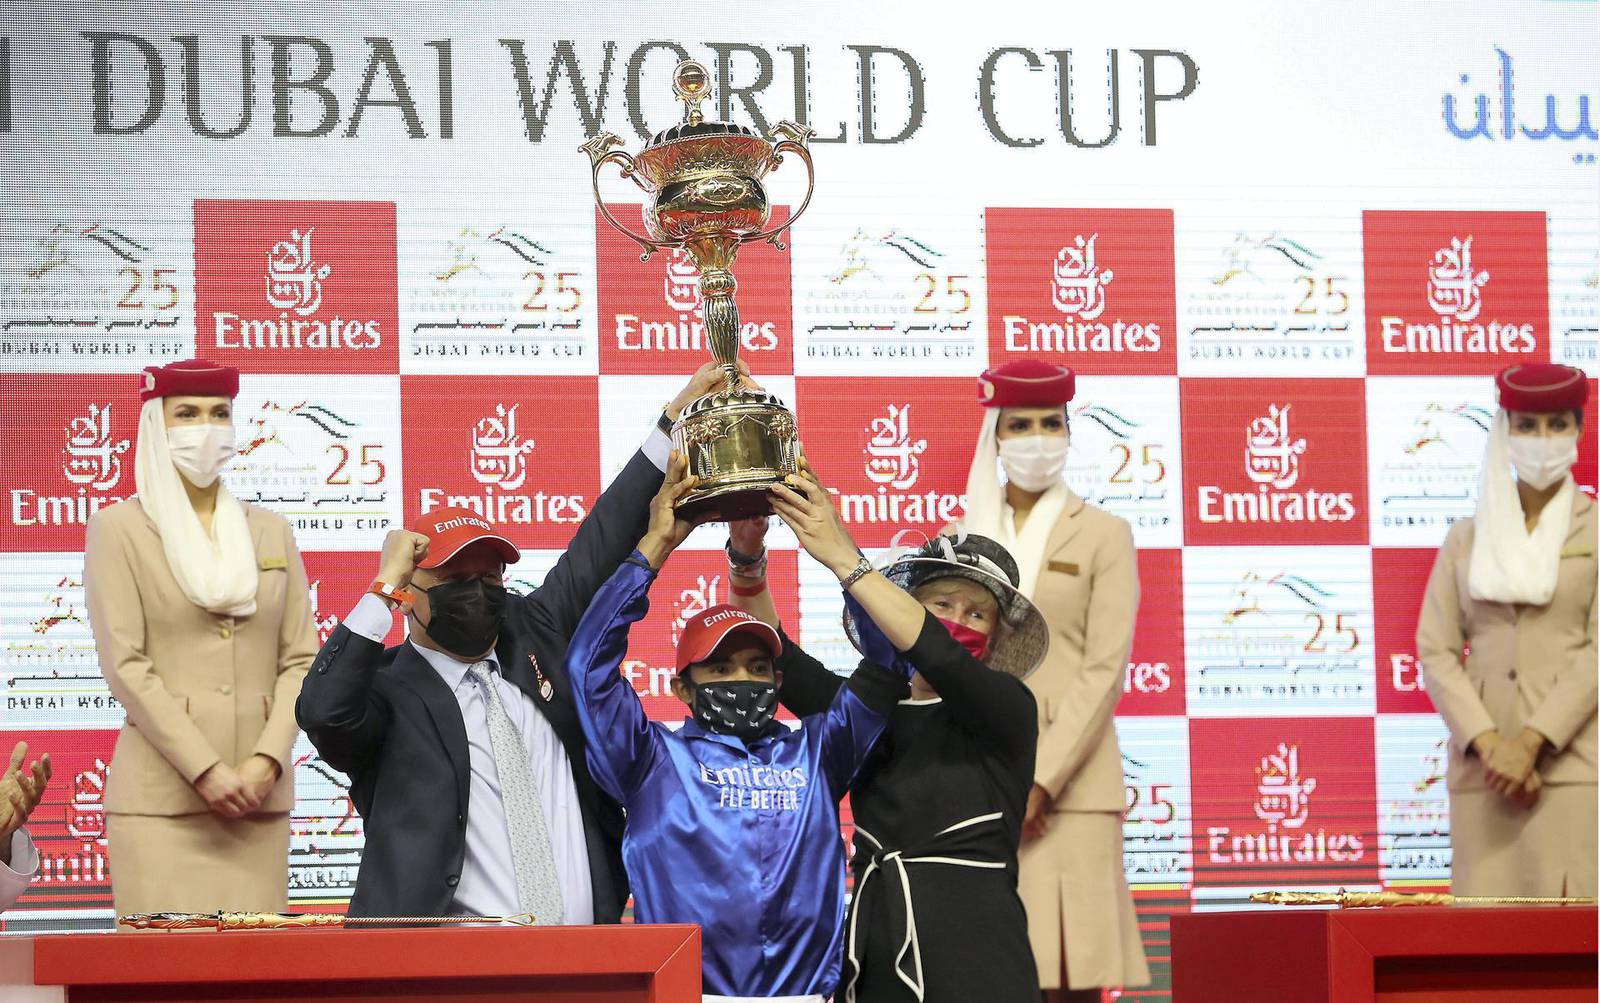 Dubai World Cup 2021 live which horses are racing and how much is the